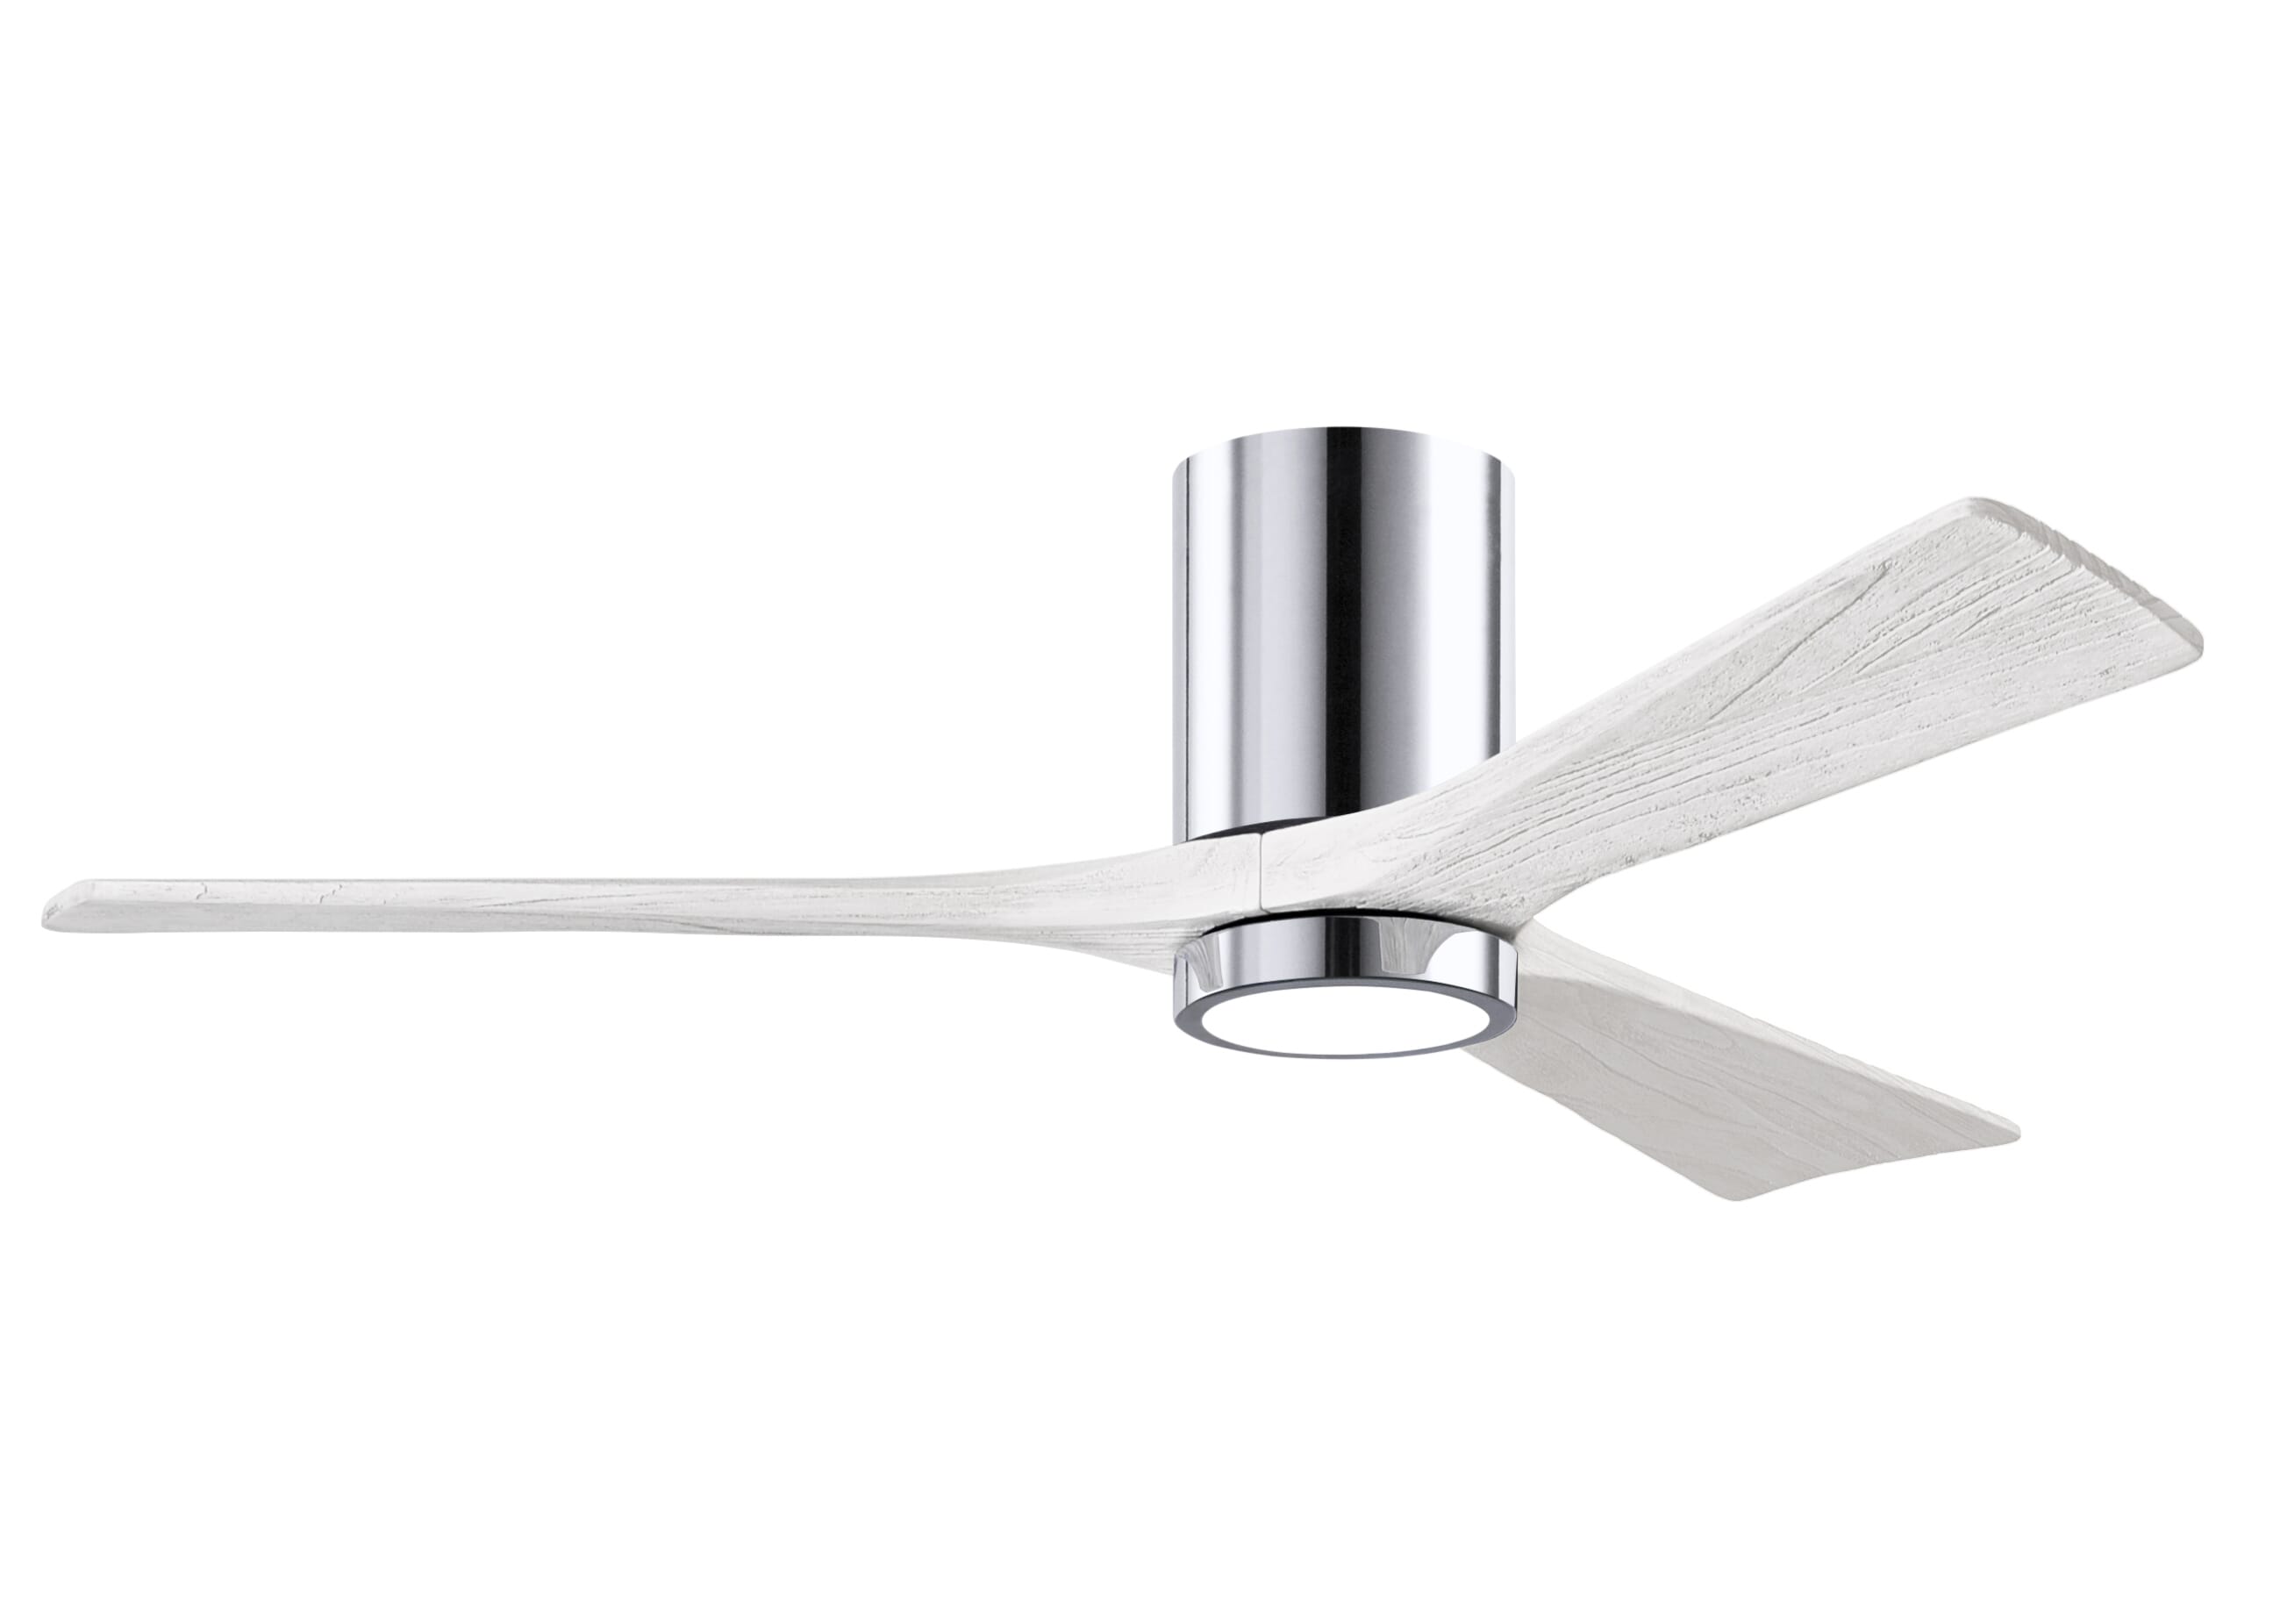 Irene 6-Speed DC 52"" Ceiling Fan w/ Integrated Light Kit in Polished Chrome with Matte White blades -  Matthews Fan Company, IR3HLK-CR-MWH-52